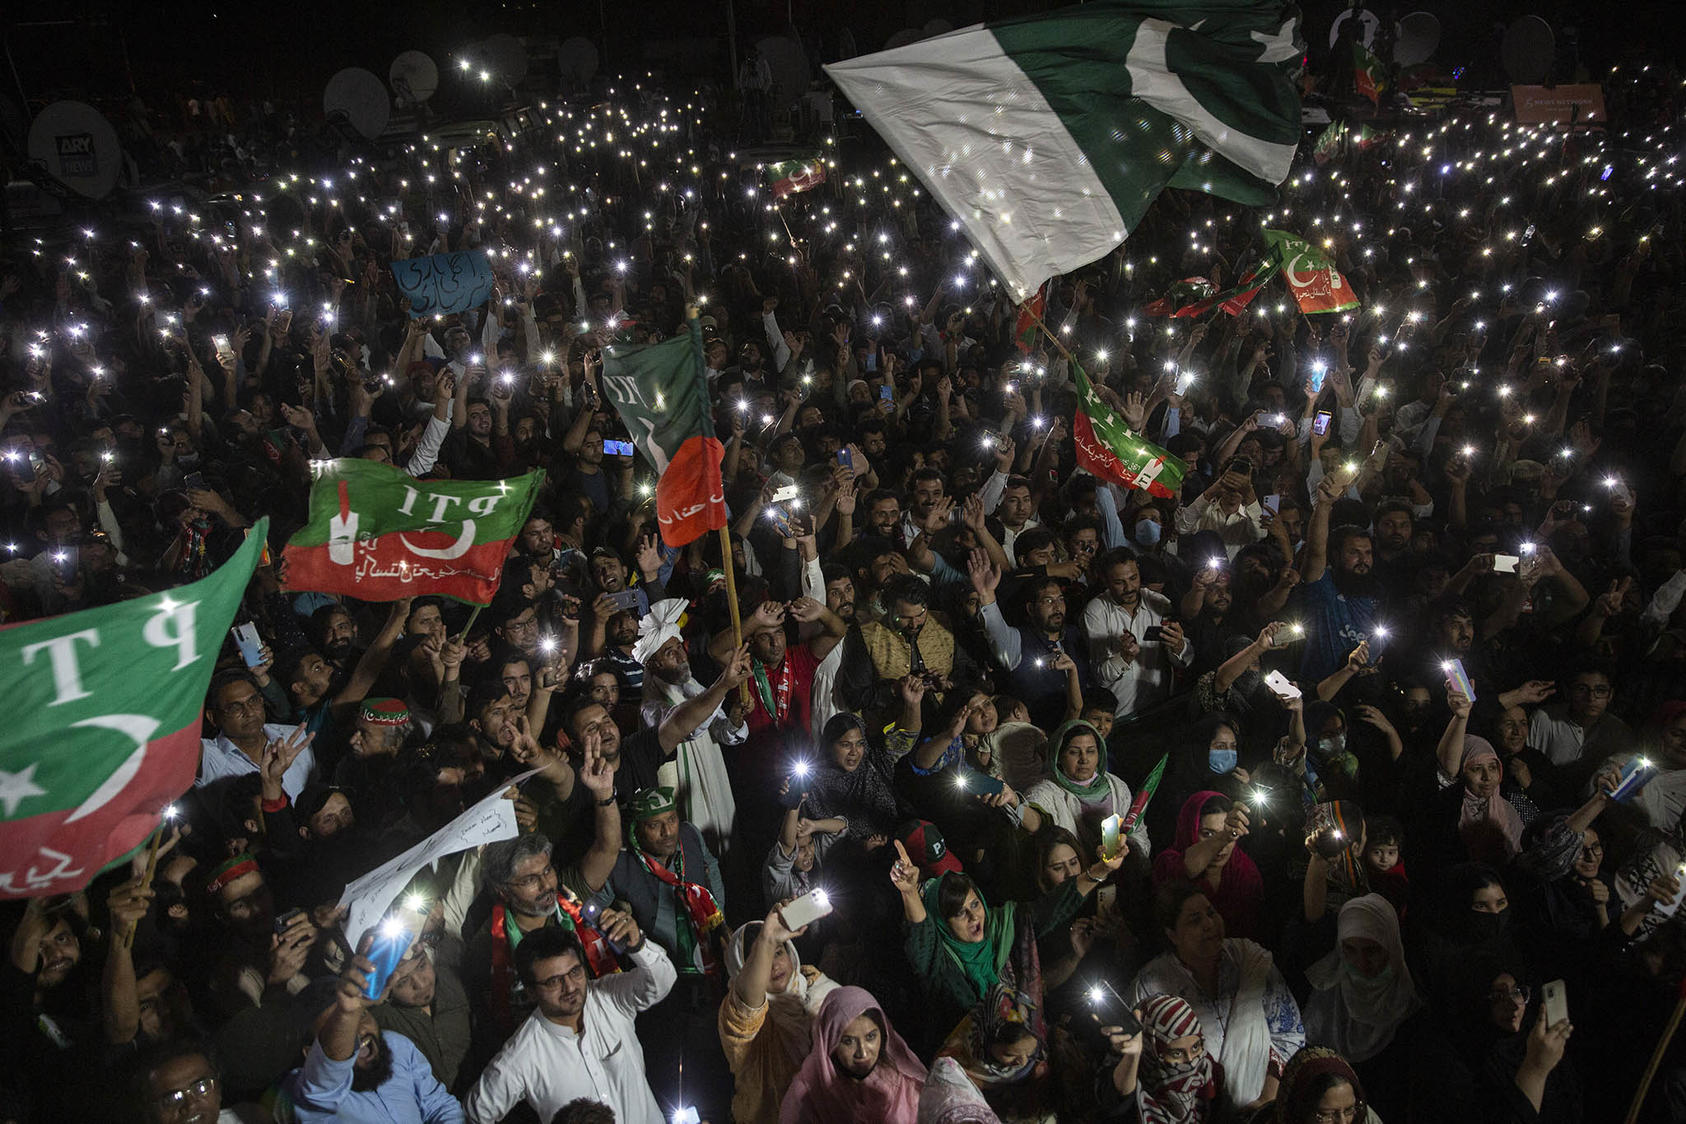 Backers of former Prime Minister Imran Khan rally in April 2022 against his ouster from office. As Khan seeks to regain power, his arrest triggered violent protests directed largely at the politically powerful military. (Saiyna Bashir/The New York Times)